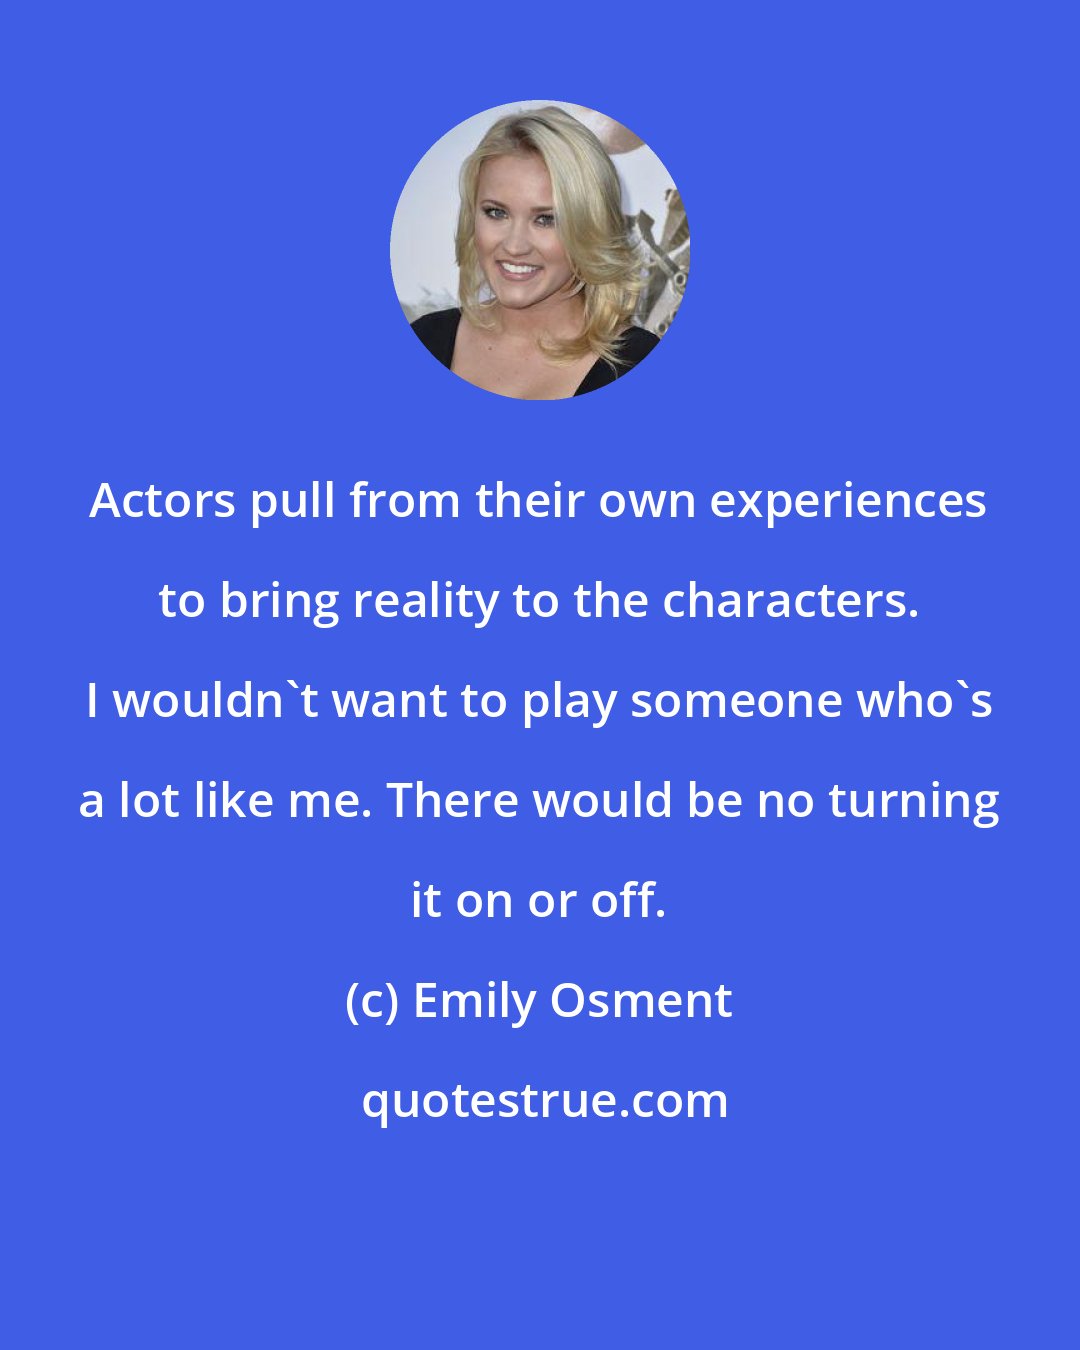 Emily Osment: Actors pull from their own experiences to bring reality to the characters. I wouldn't want to play someone who's a lot like me. There would be no turning it on or off.